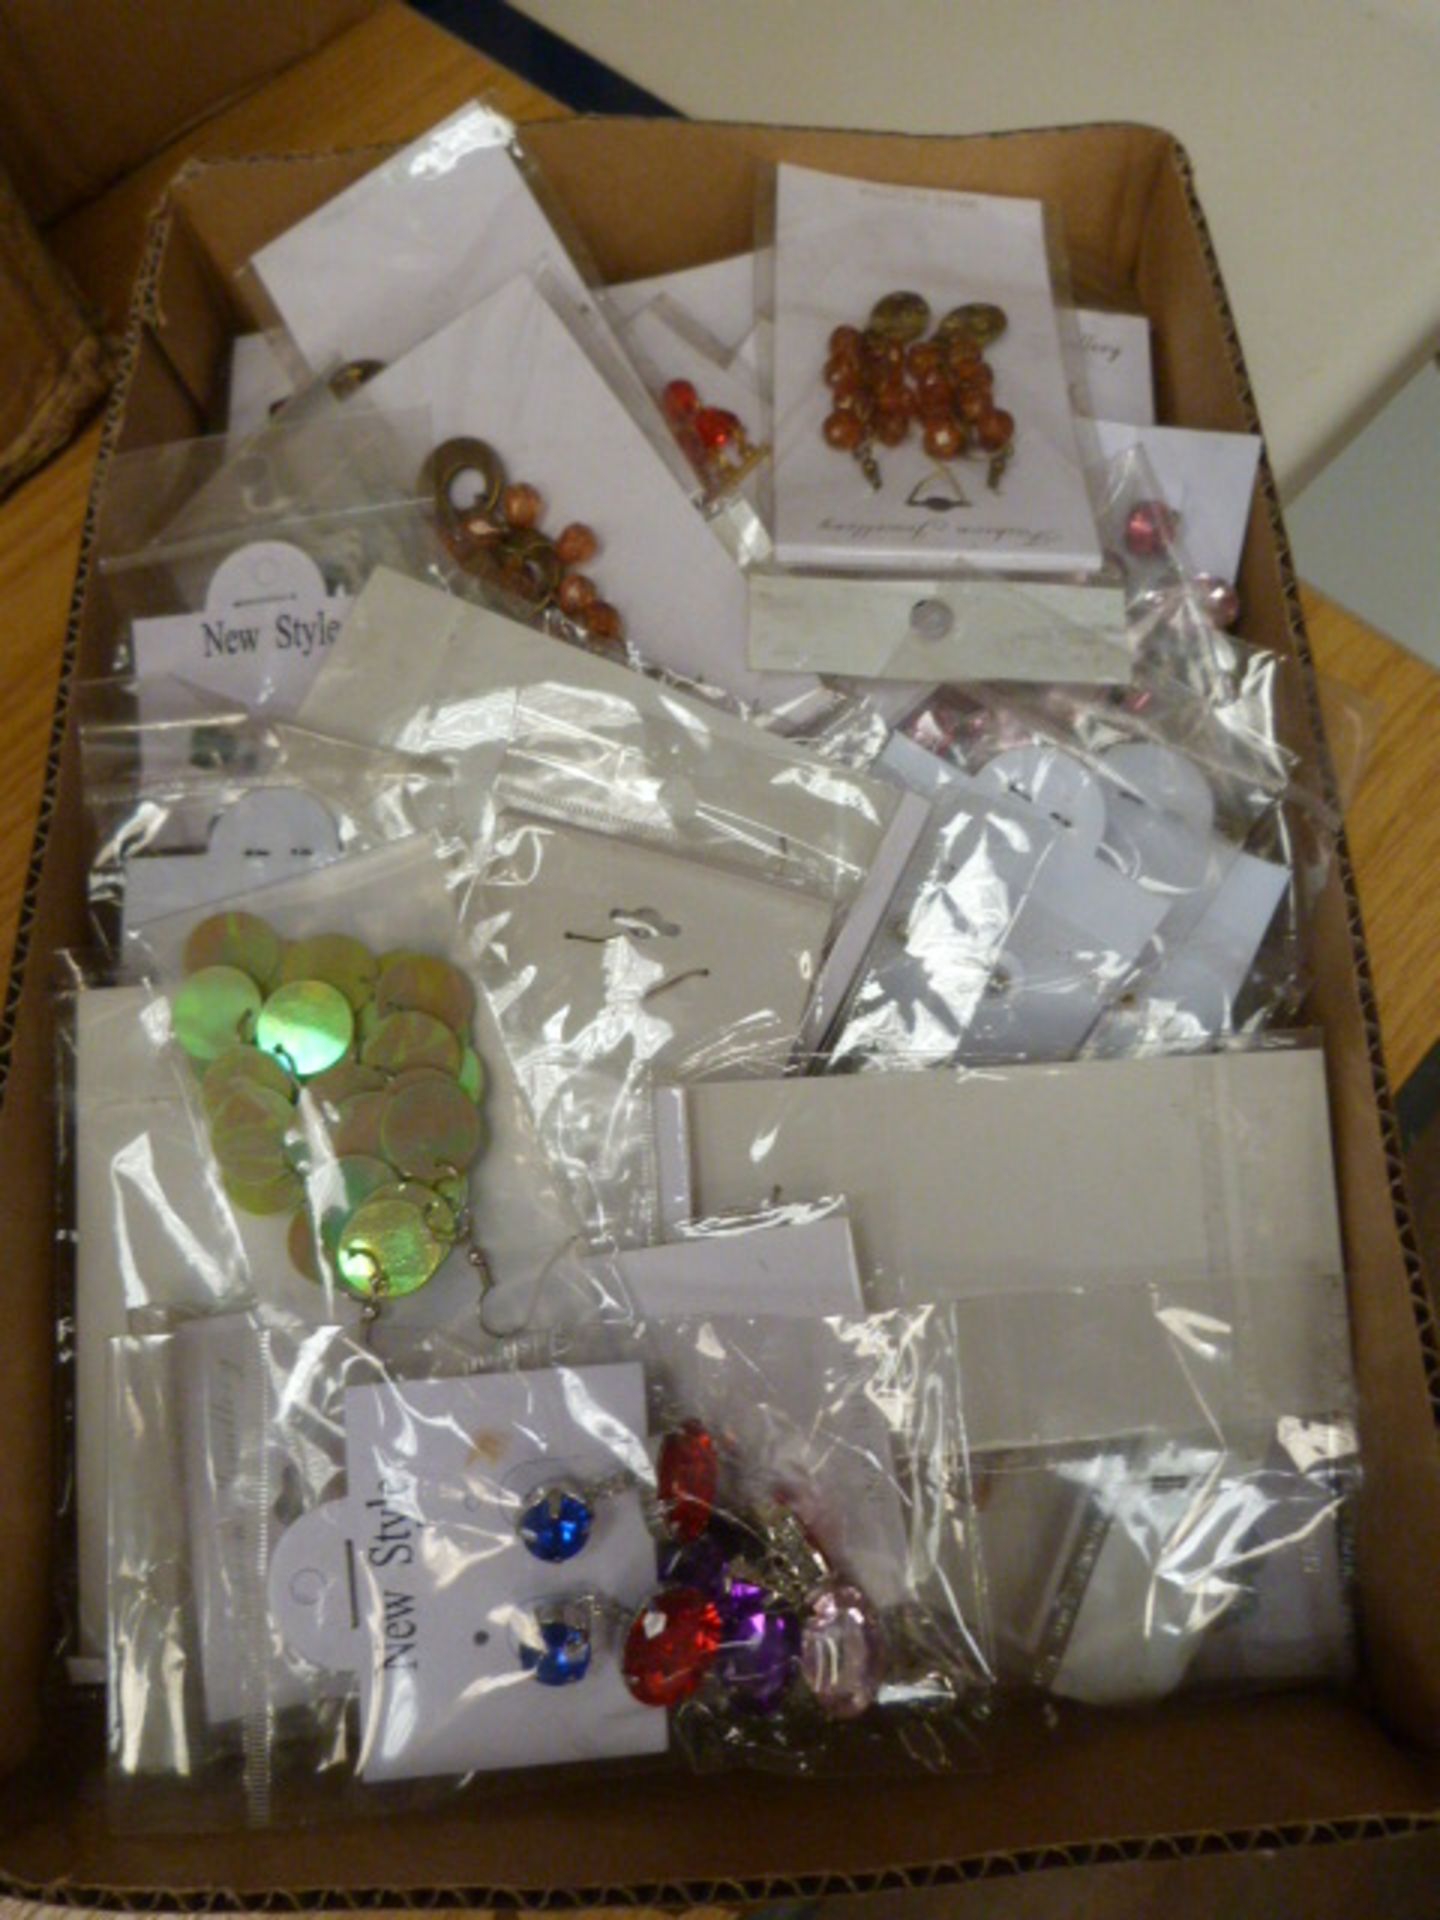 Box Containing Forty Pairs of Fashion Jewellery Ea